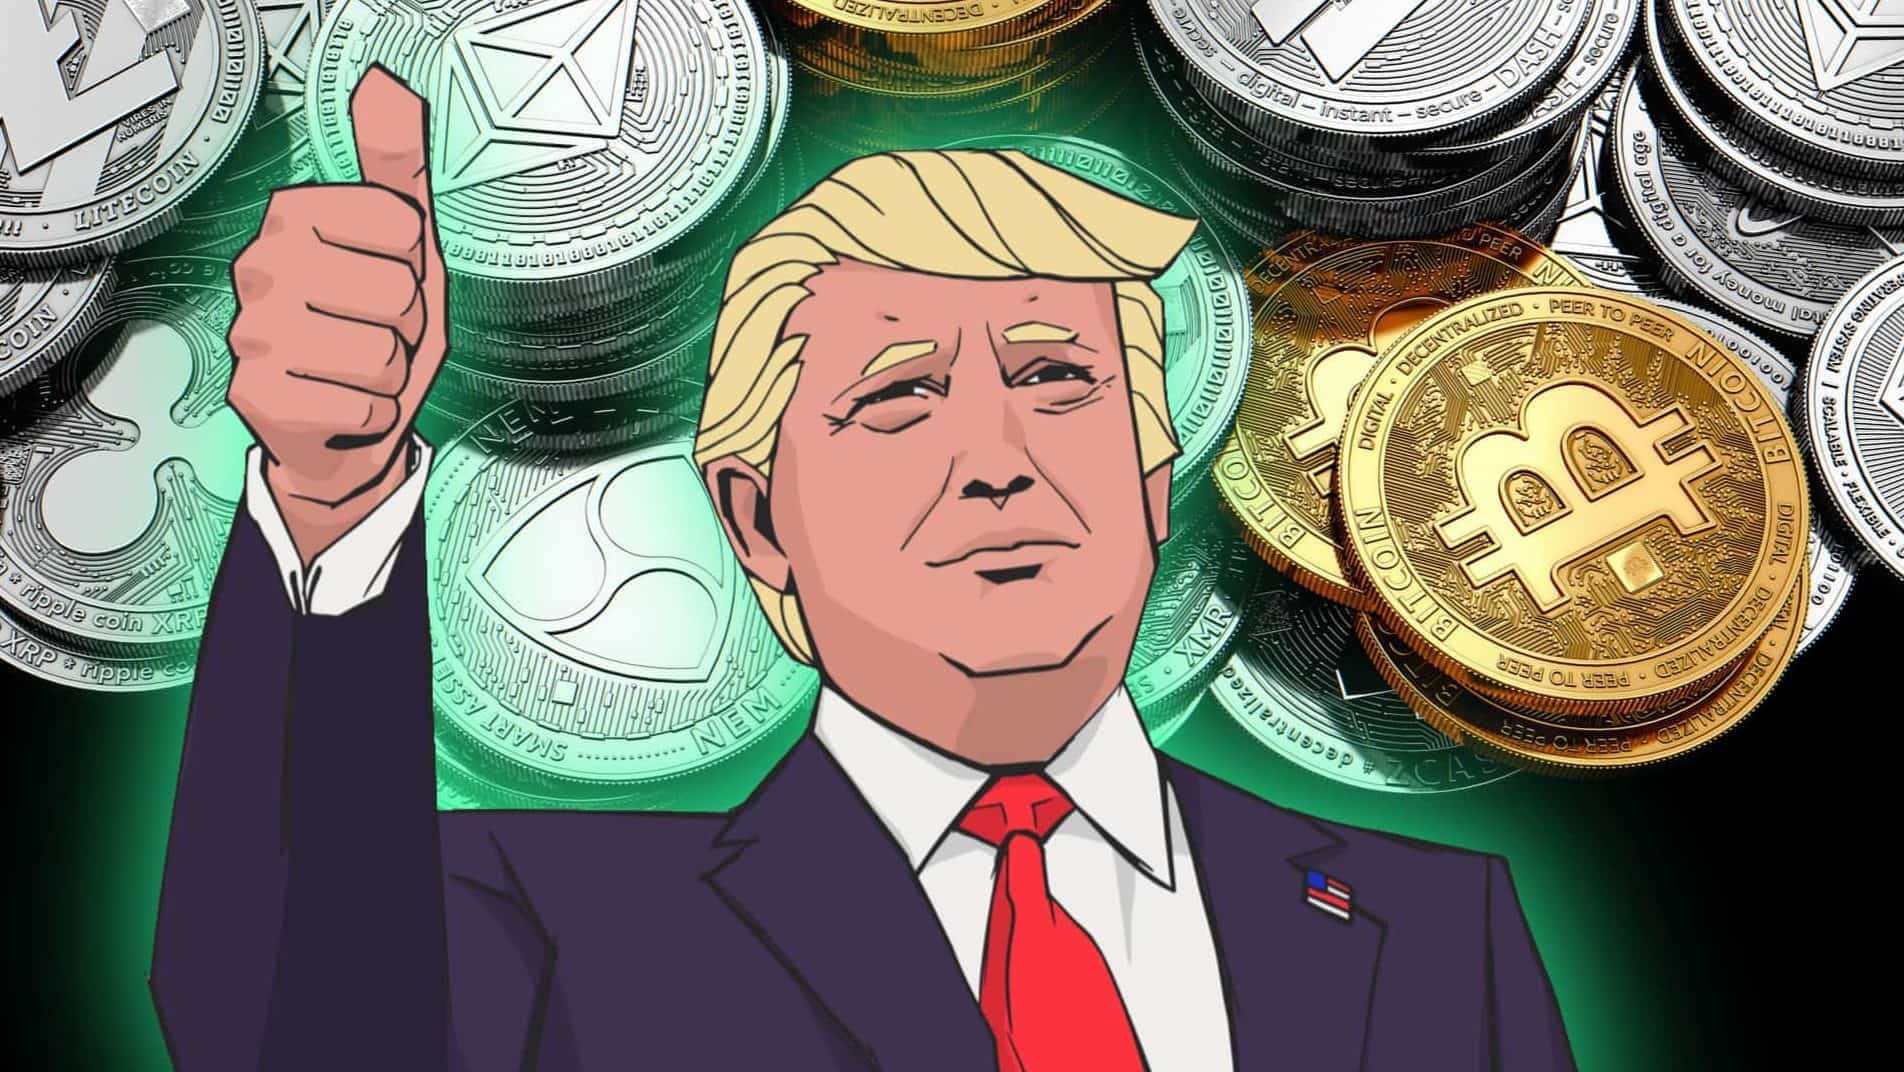 Here’s What Donald Trump Thinks About Cryptocurrency